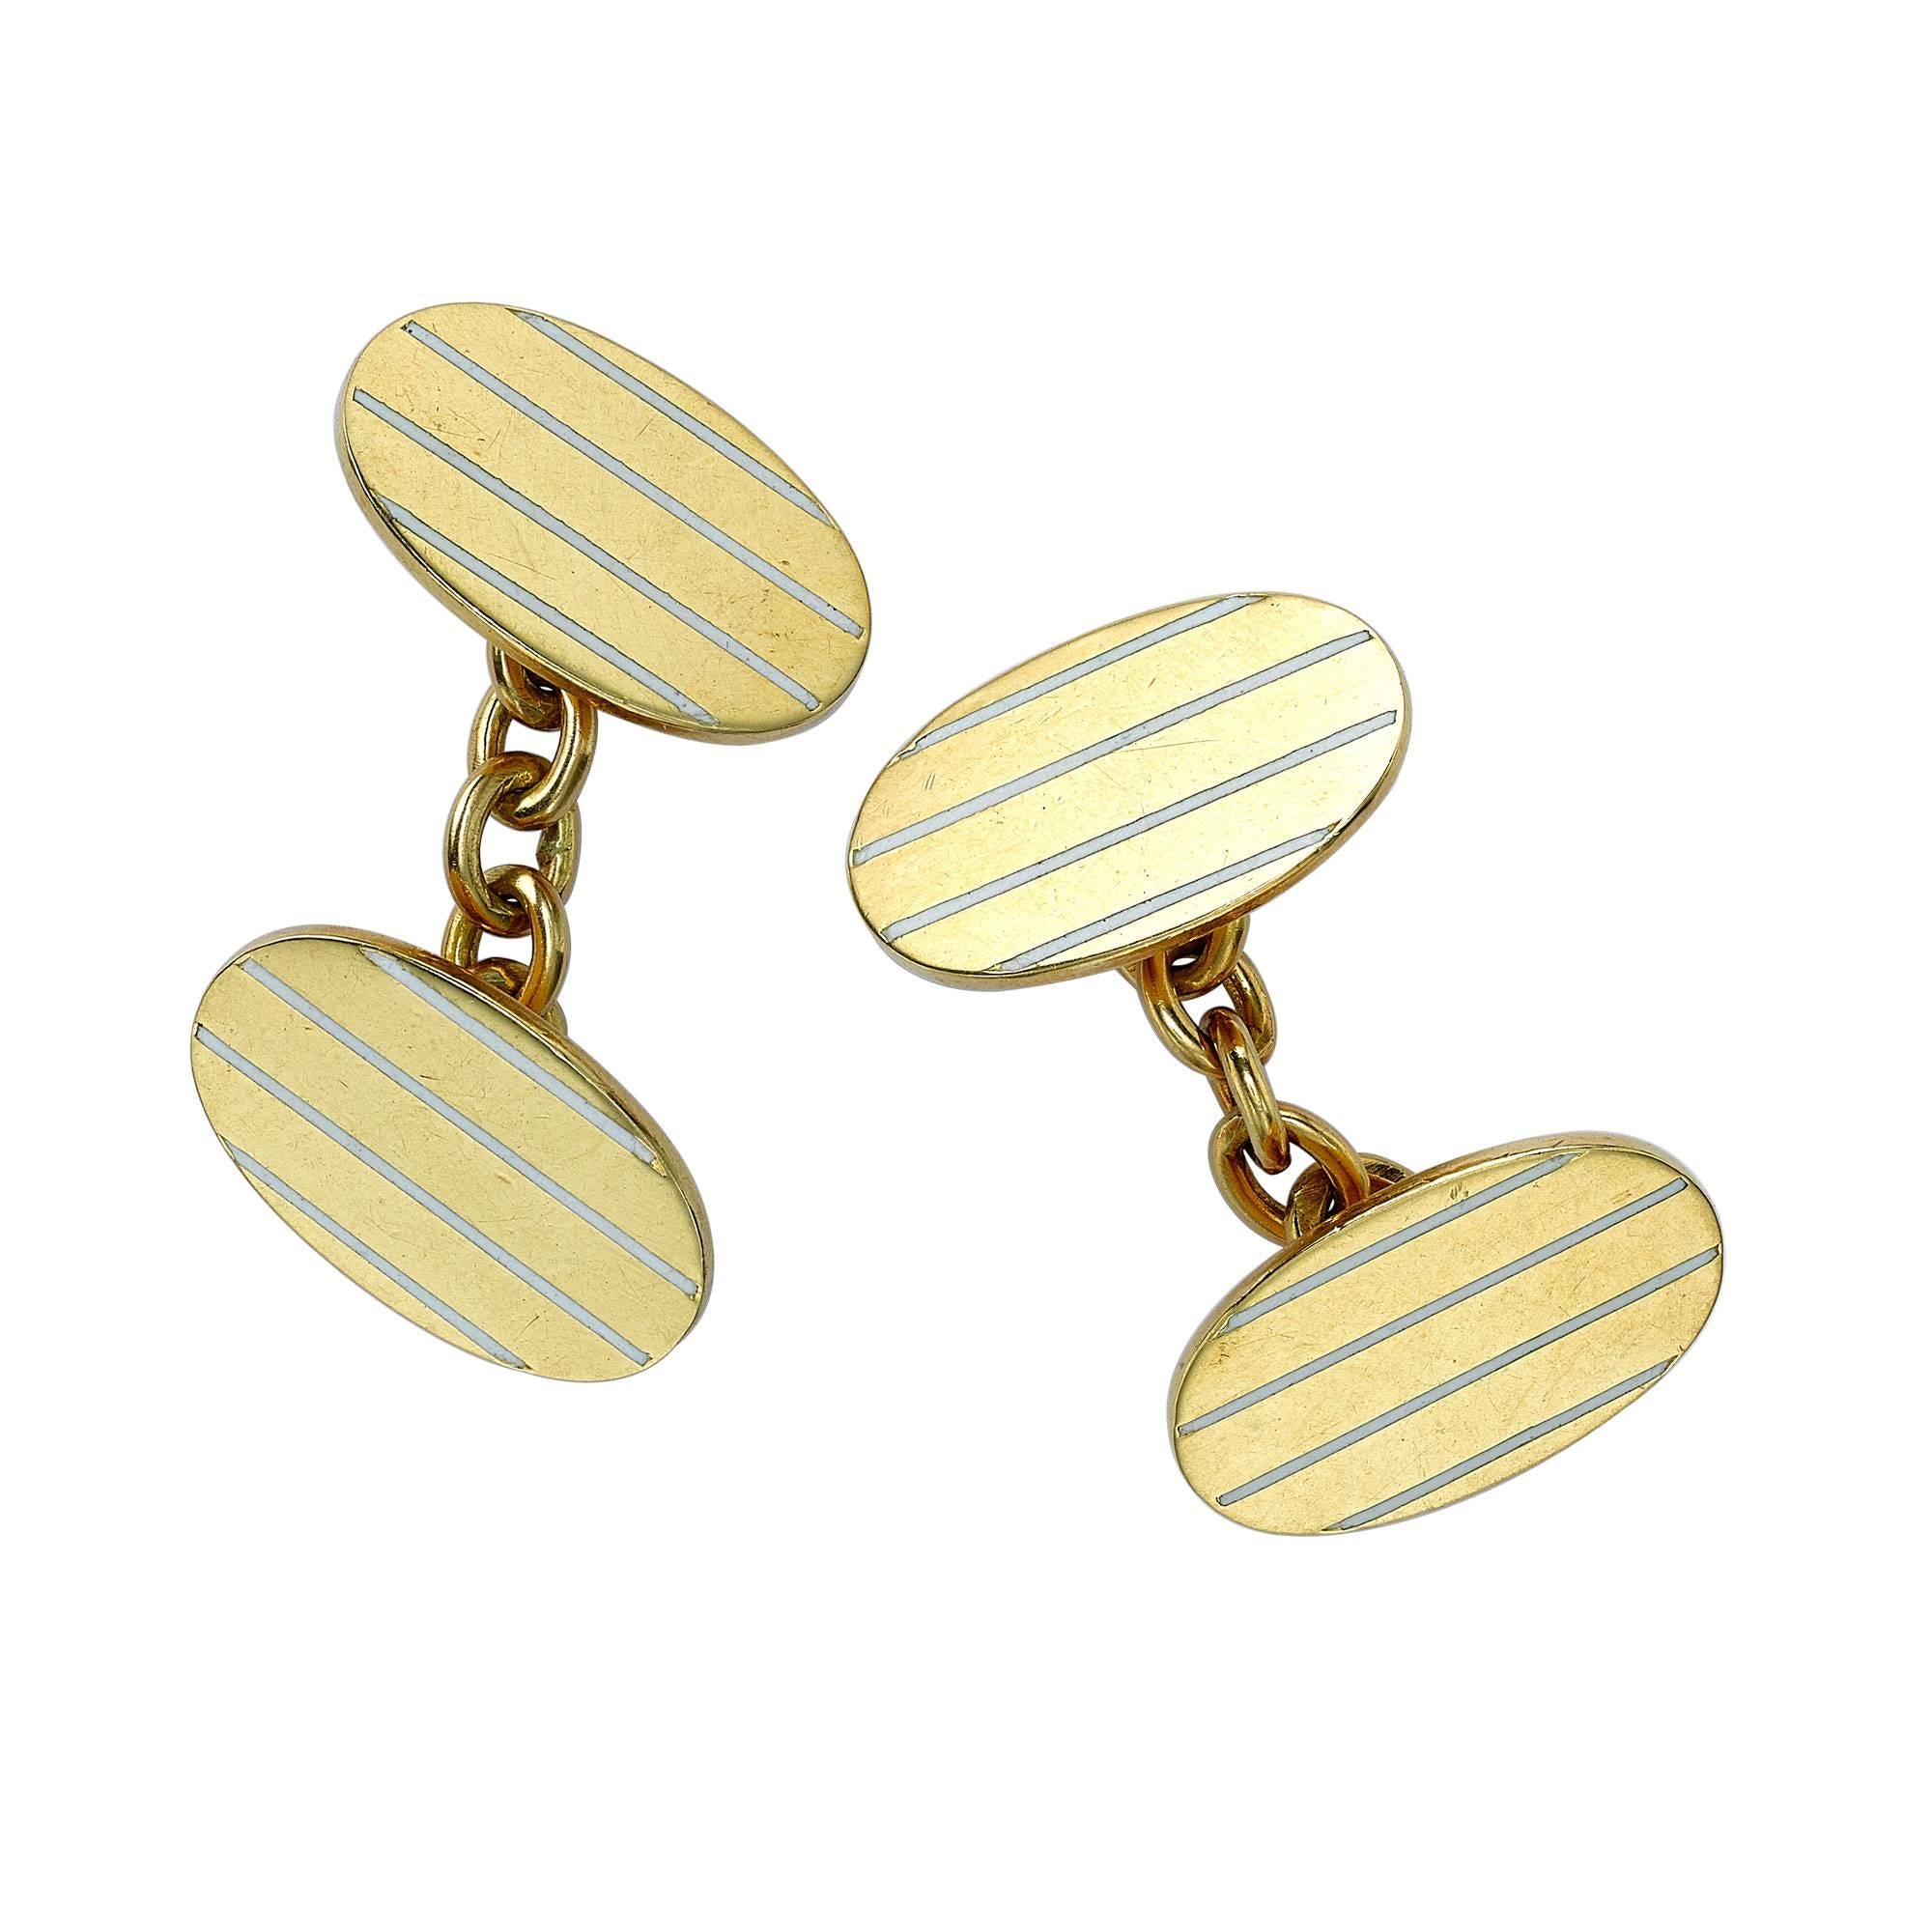 Pair of Yellow Gold Cufflinks For Sale